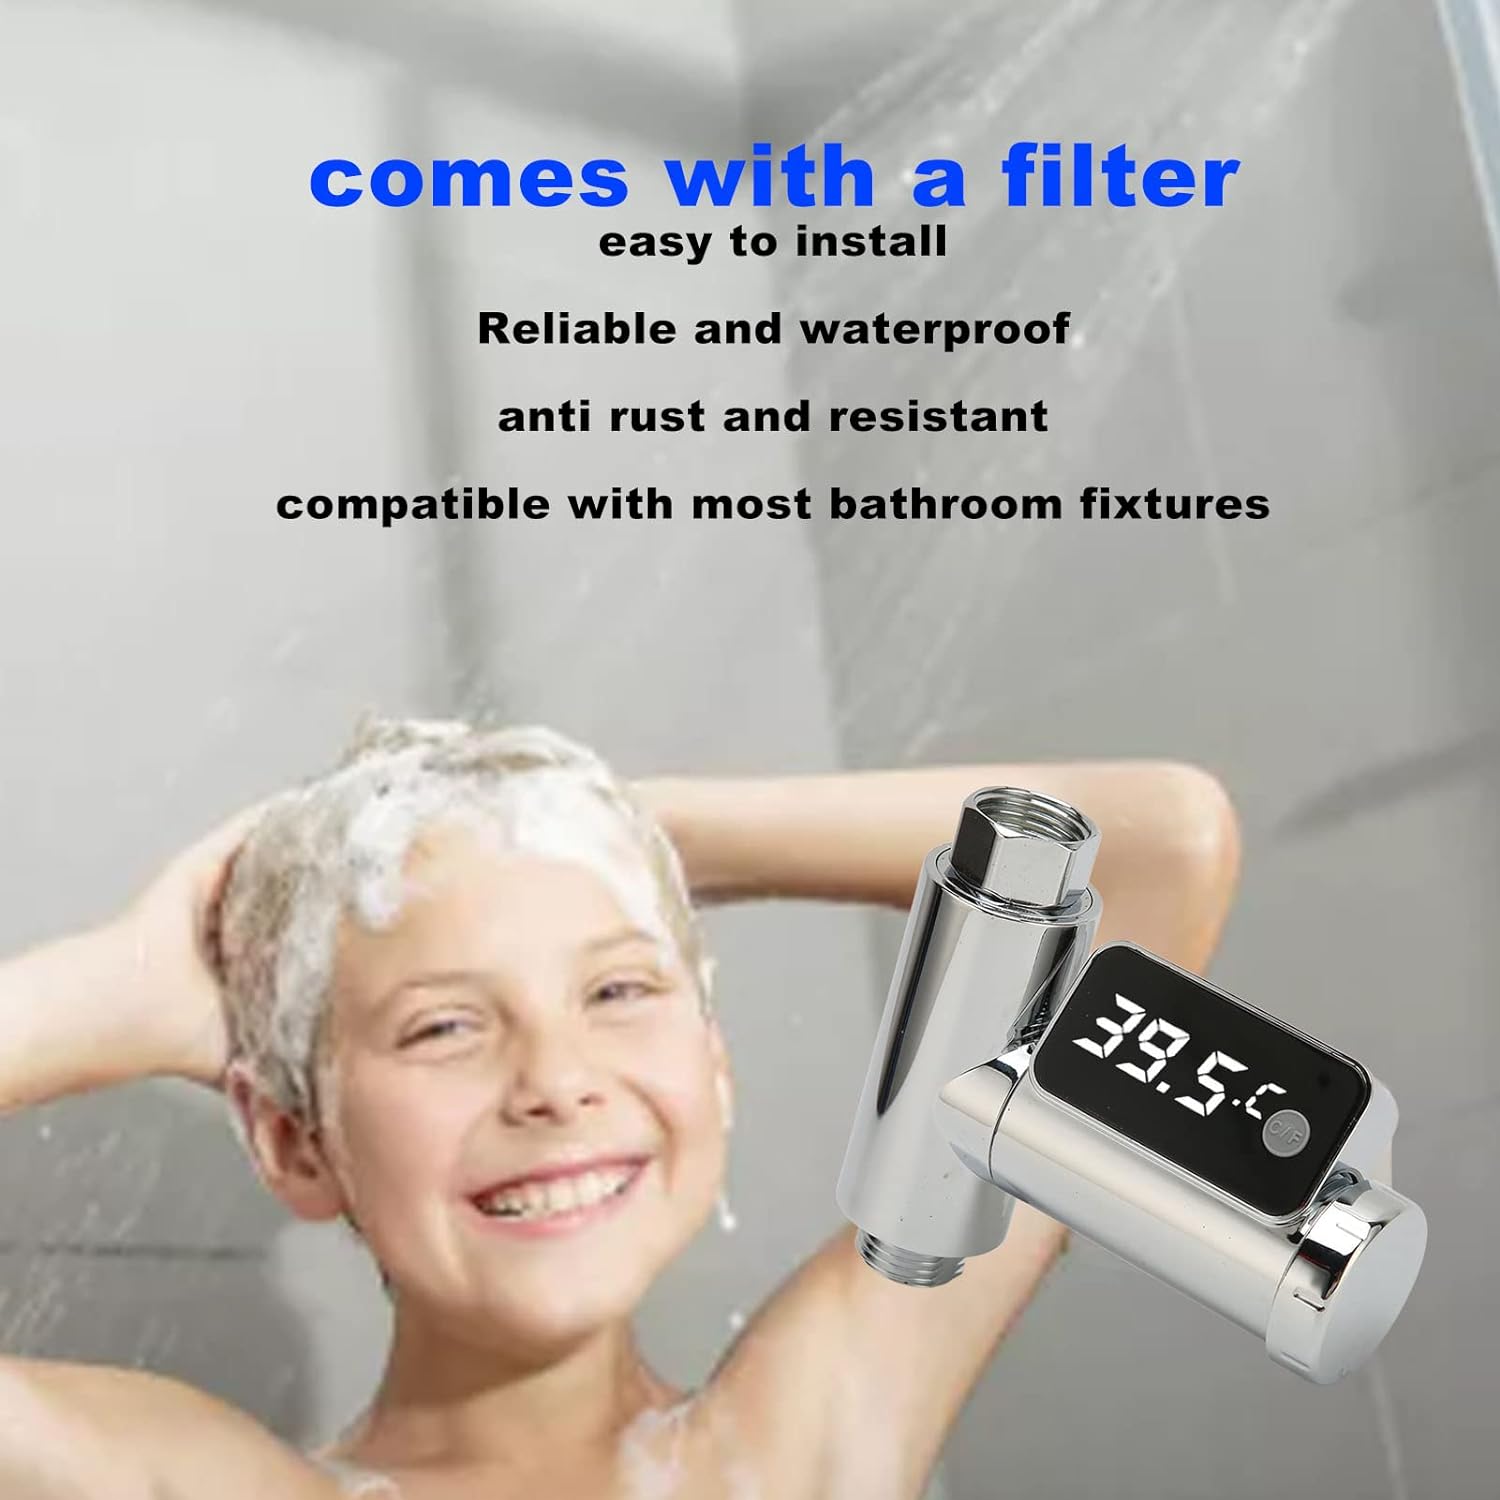 Shower Thermometer Display, LED Digital Display 5?-85? (41?-185?) Baby Bath Water Thermometer, 360° Rotating Screen Waterproof, for Adults Kids Bathroom : Baby